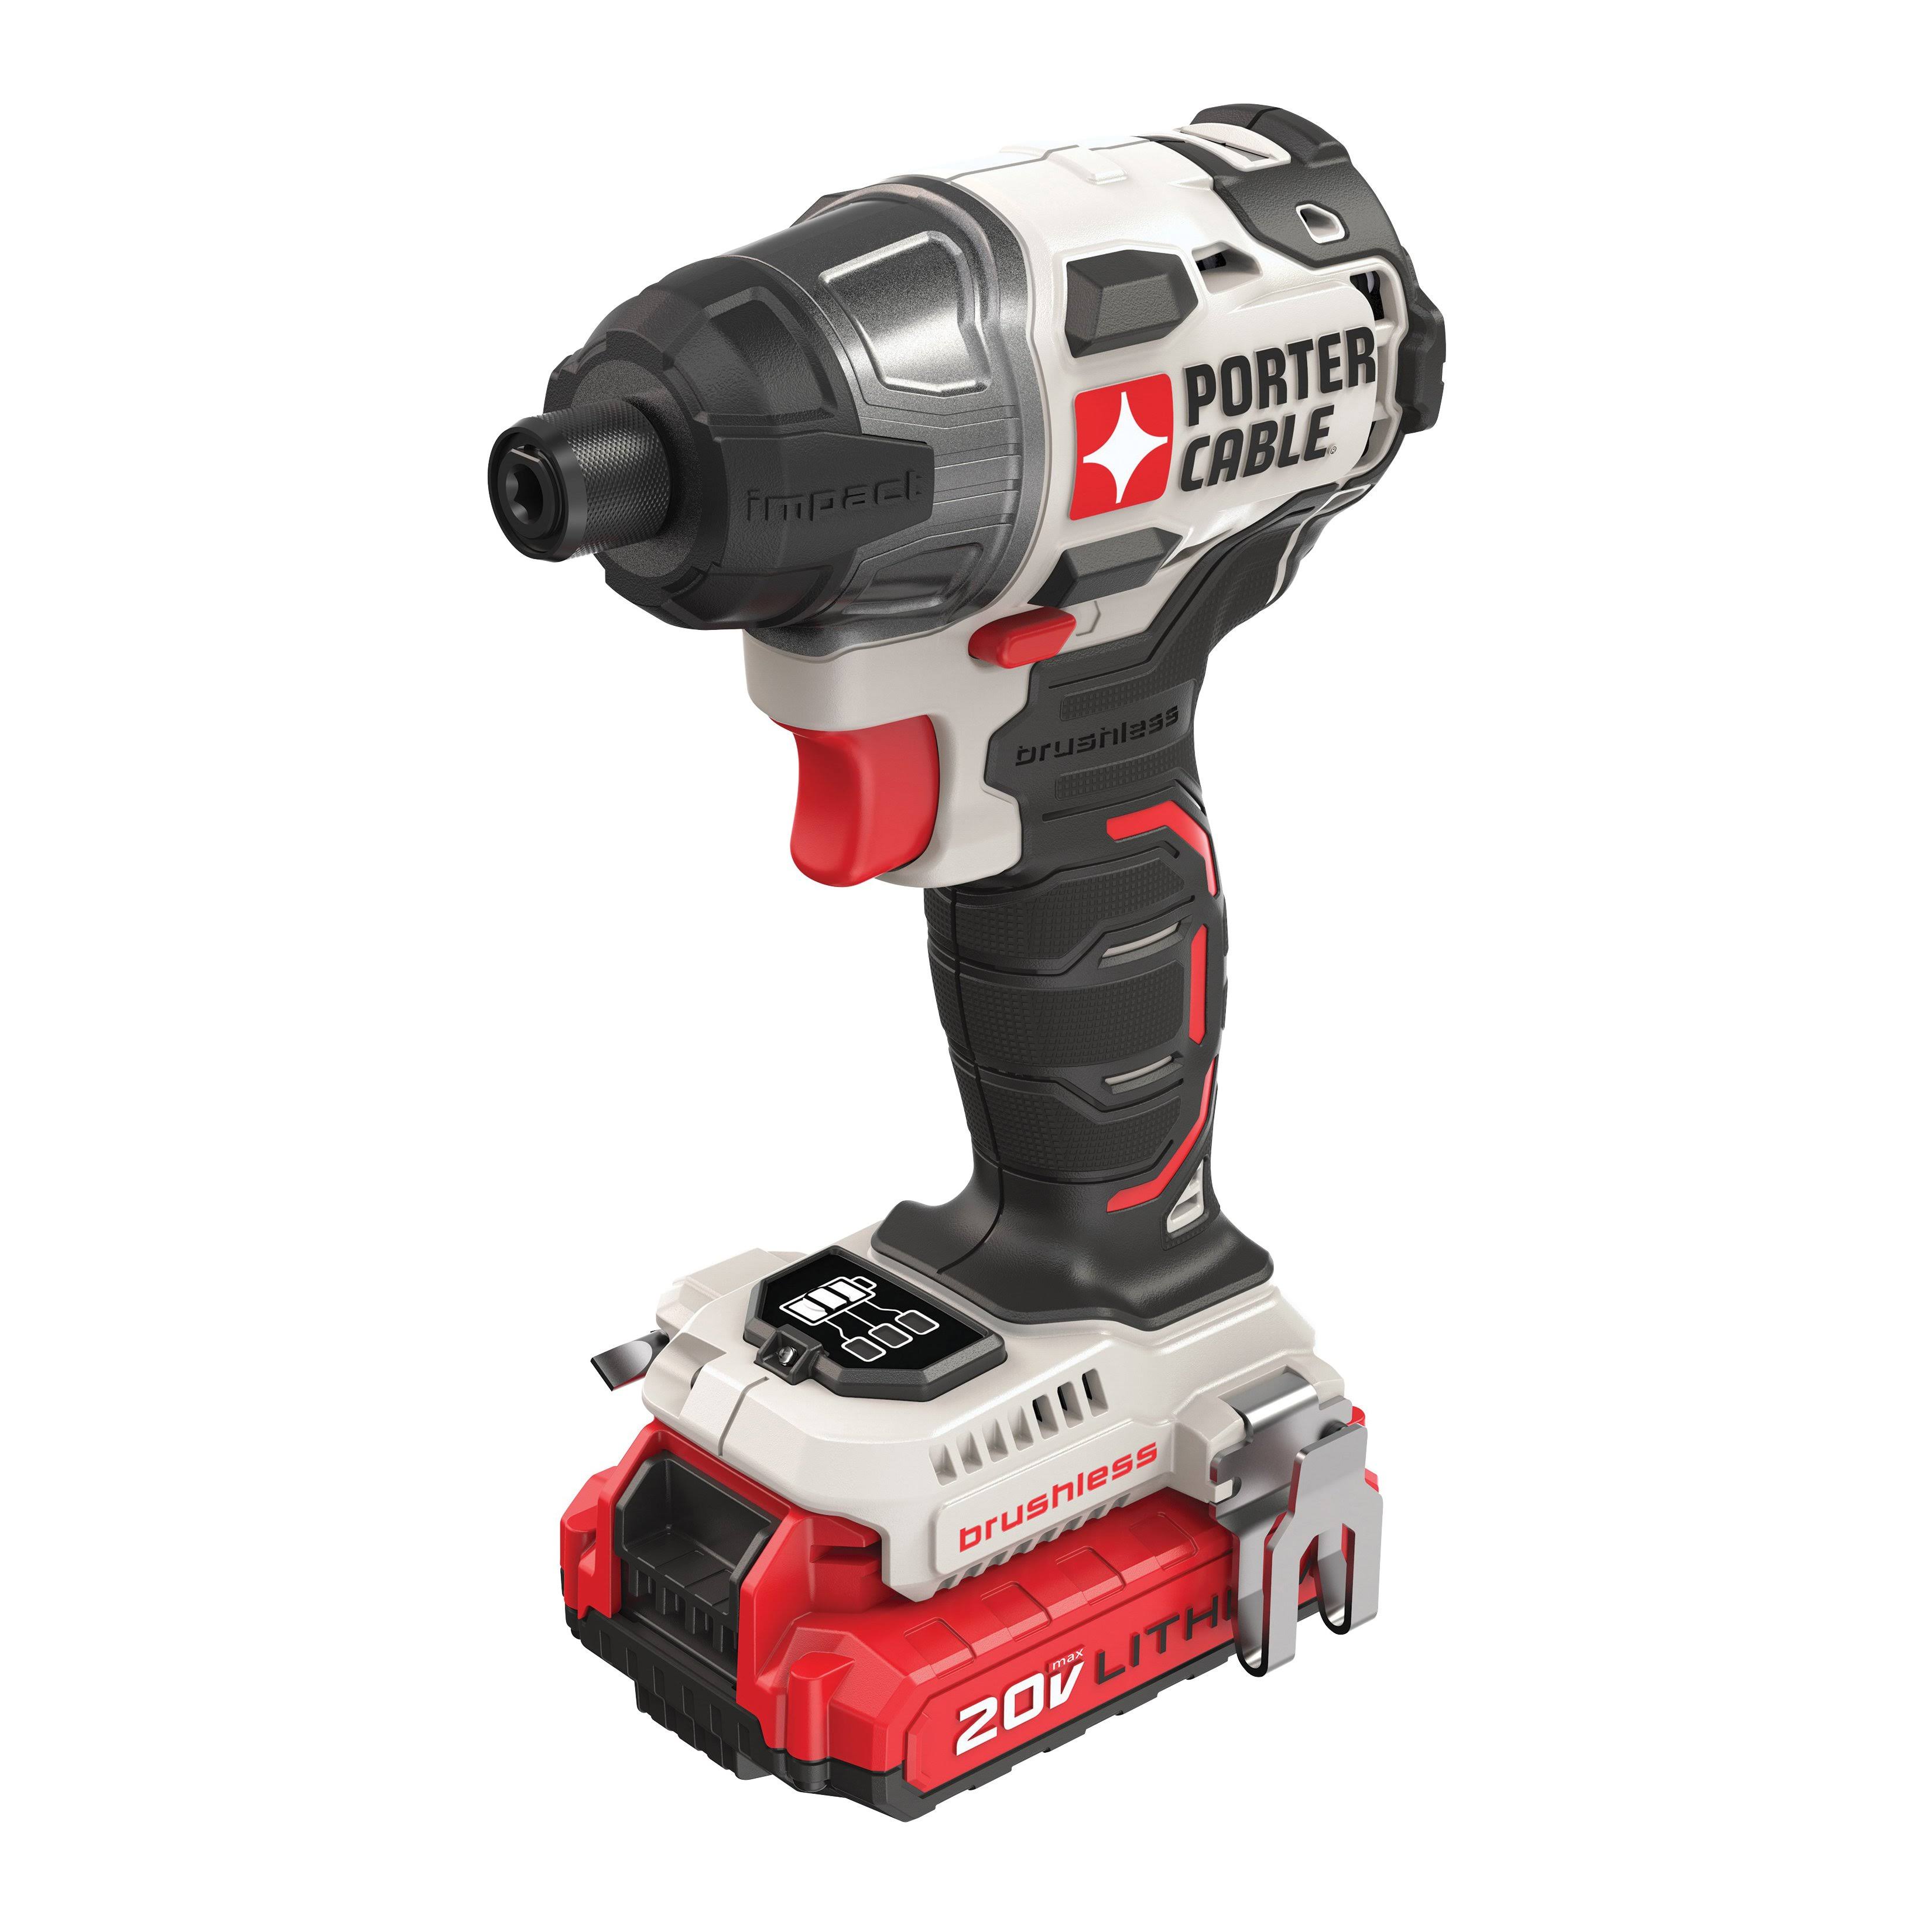 Porter-Cable PCCK647LB 20V MAX 1.5 Ah Cordless Lithium-Ion Brushless 1/4 in. Impact Driver Kit